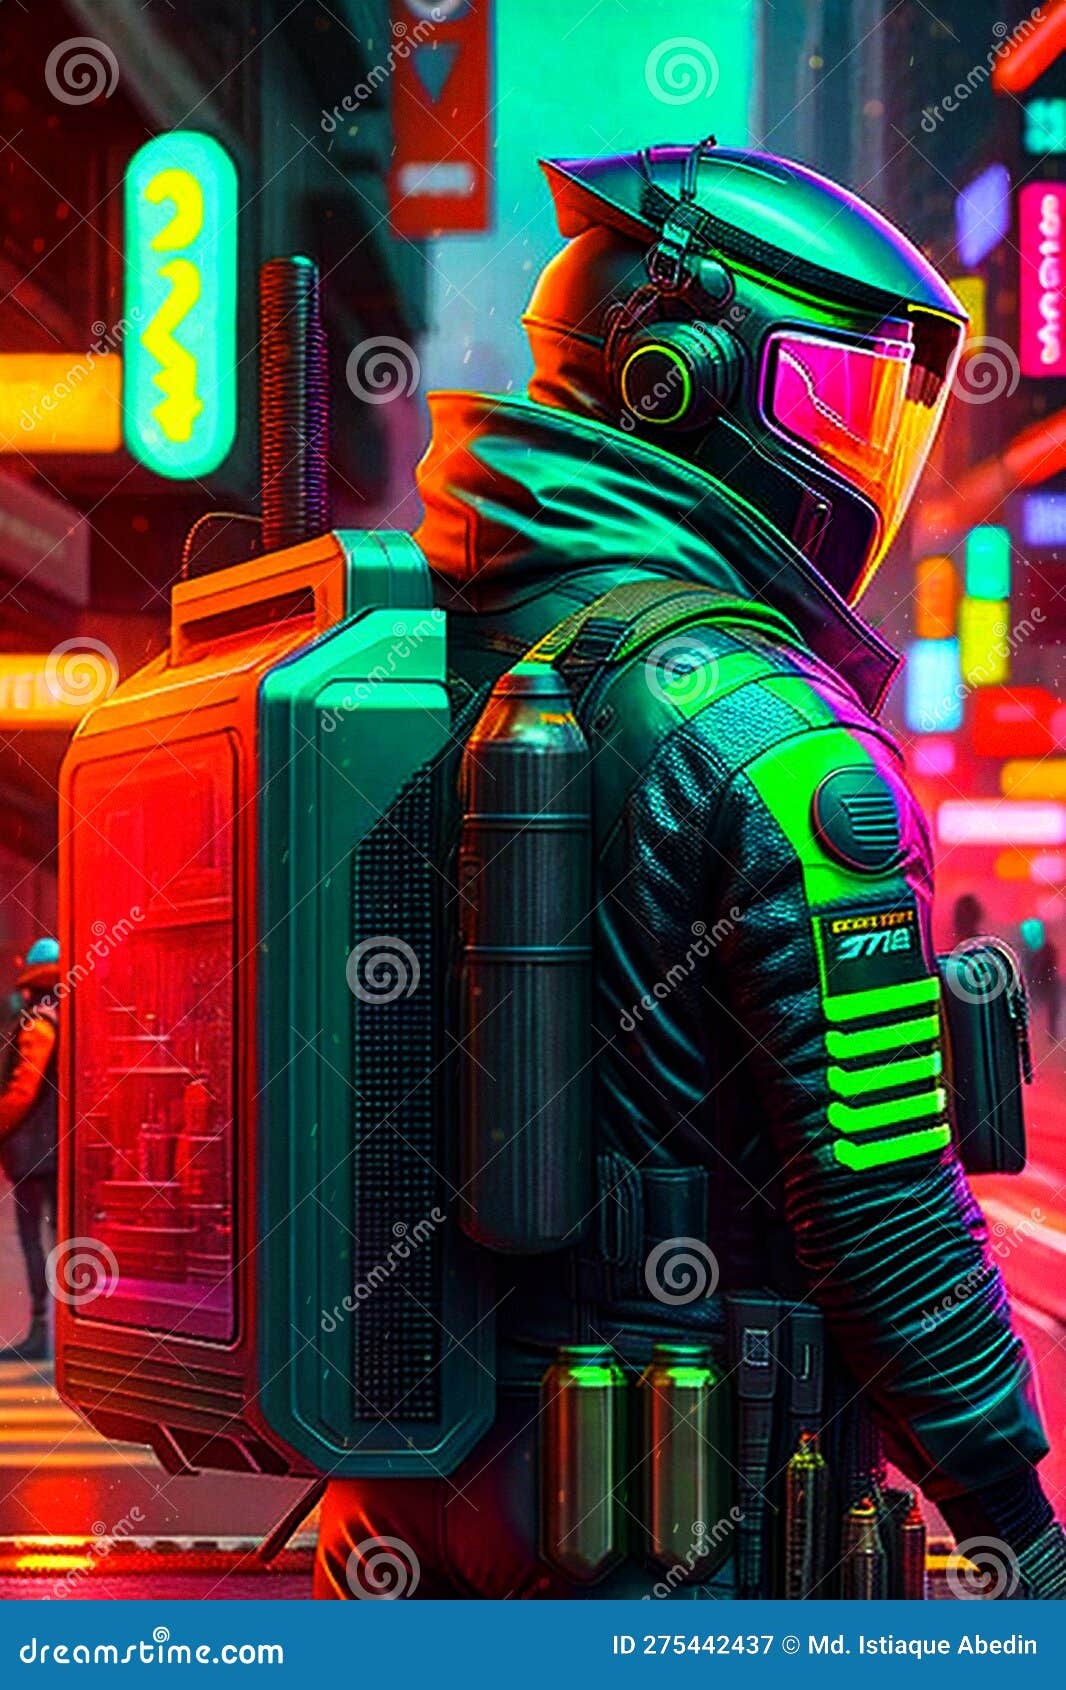 Cyberpunk Military Soldiers Patrolling At Night With Futuristic ...